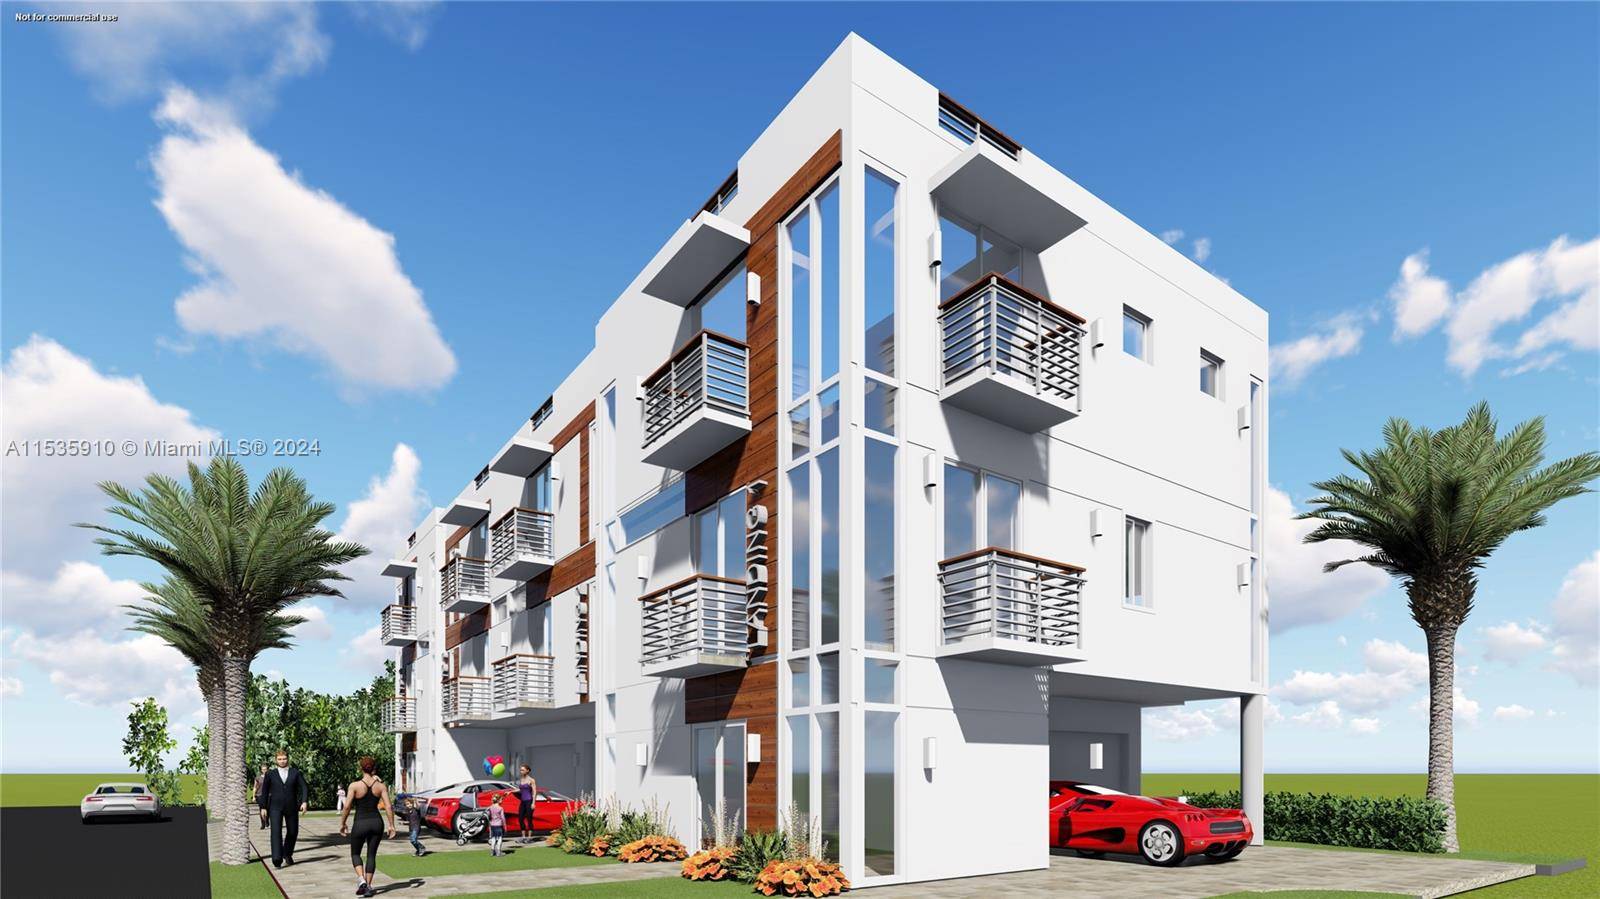 Opportunity for investors, project of 4 townhomes starting at 1816 square feet the smallest up to 3047 square feet including terraces and balconies, with luxury finishes just minutes from the ...